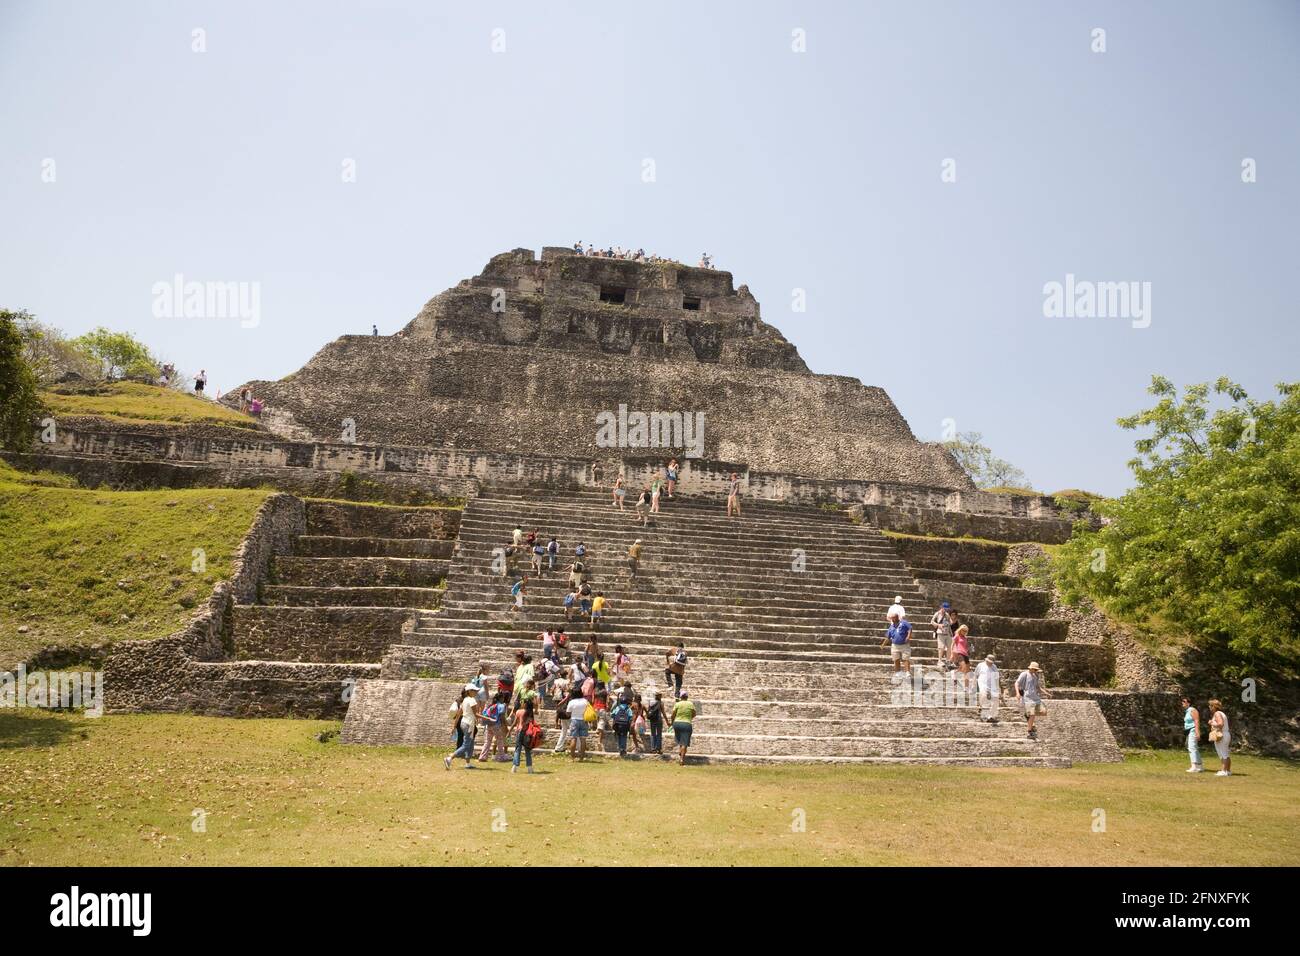 The Mayan ruins of Xunantunich in the Cayo District of Belize. Stock Photo